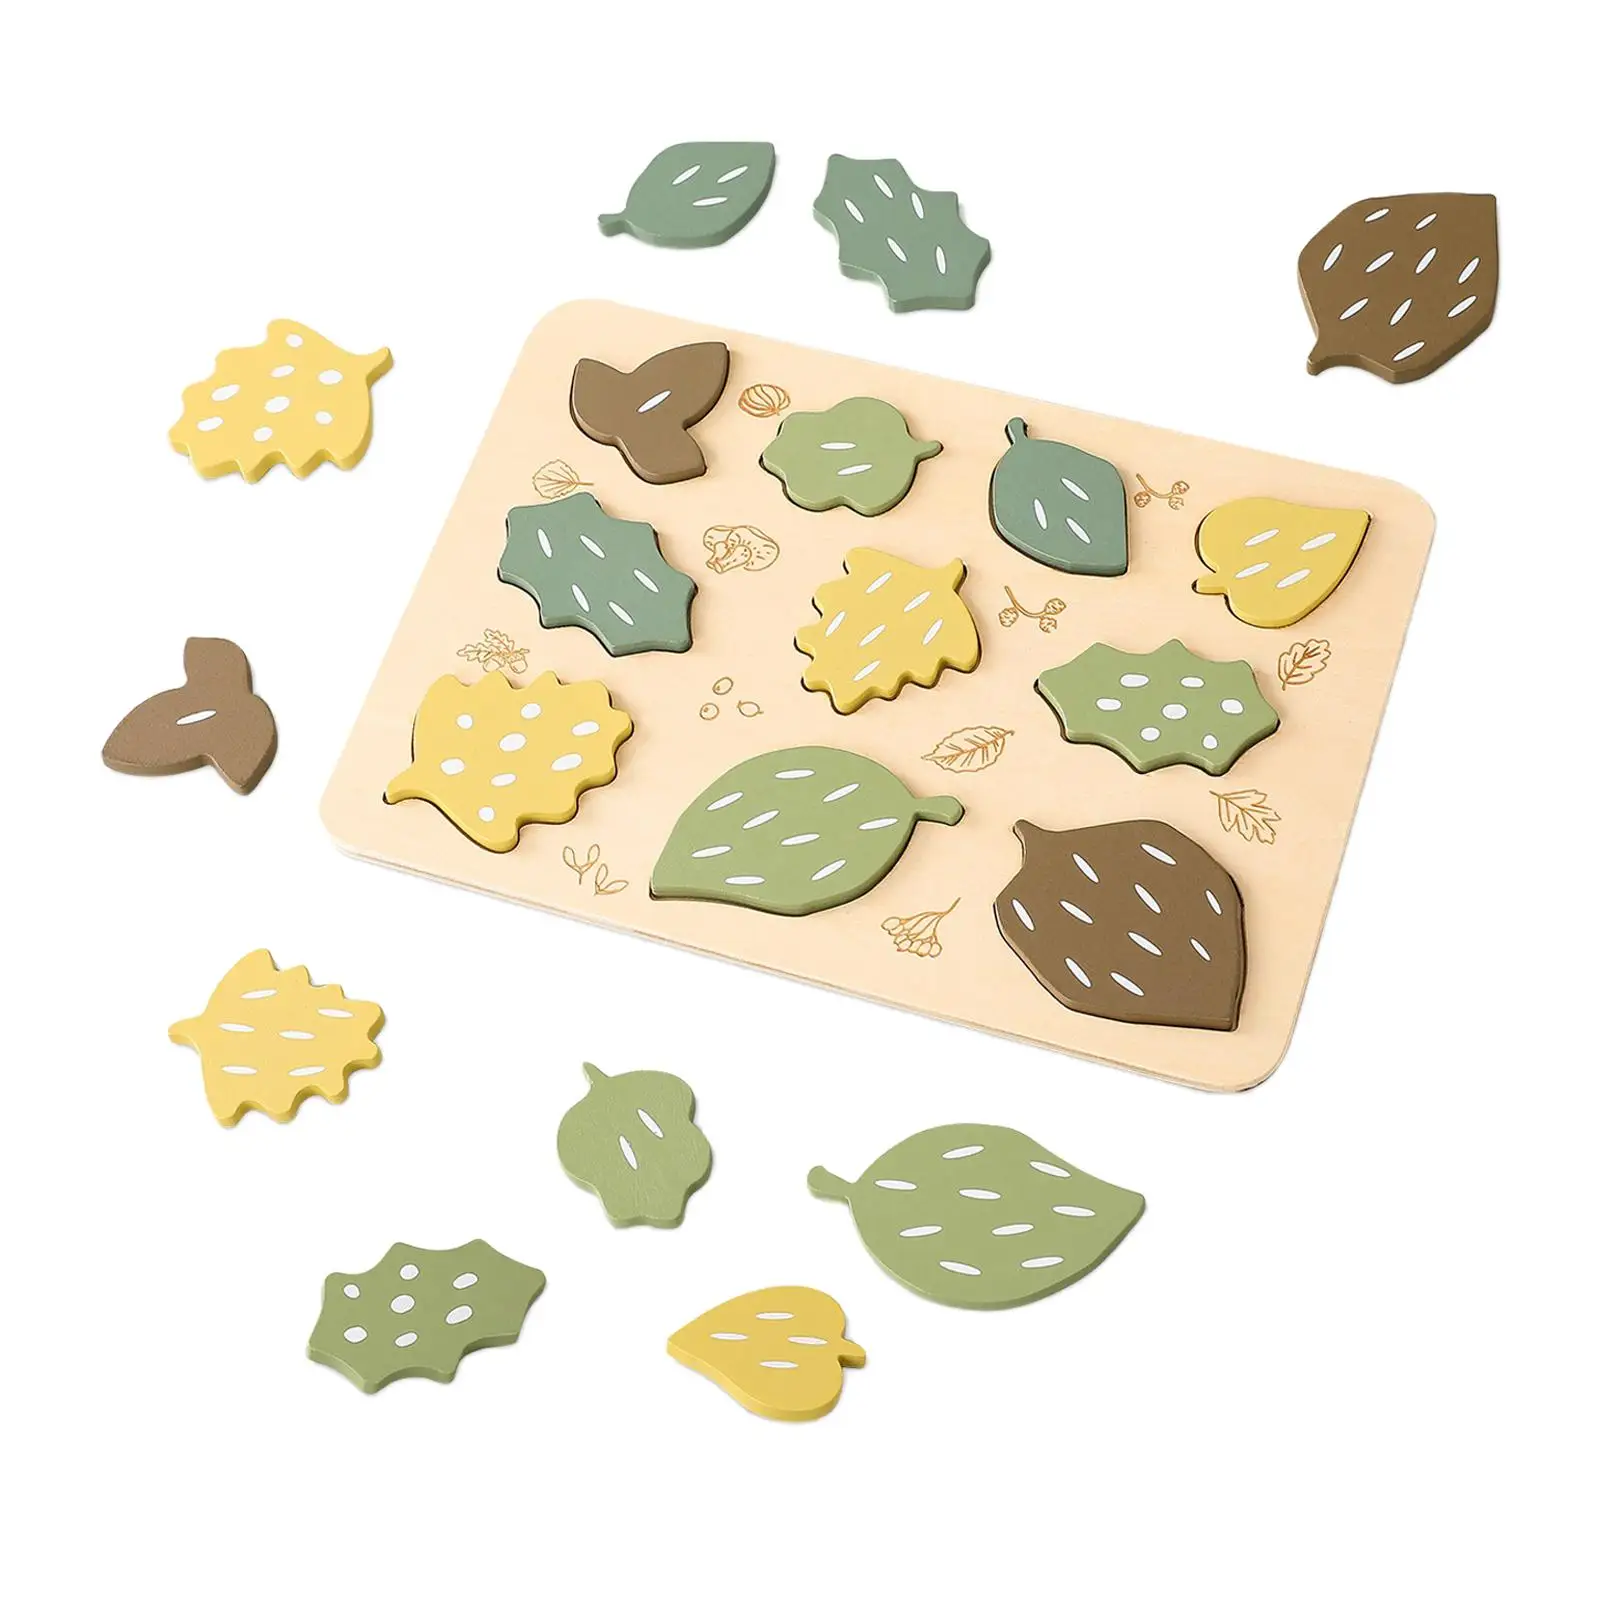 Leaf Jigsaw Puzzles Montessori Stacking Blocks Colorful Shape for Preschool Boys Toddlers